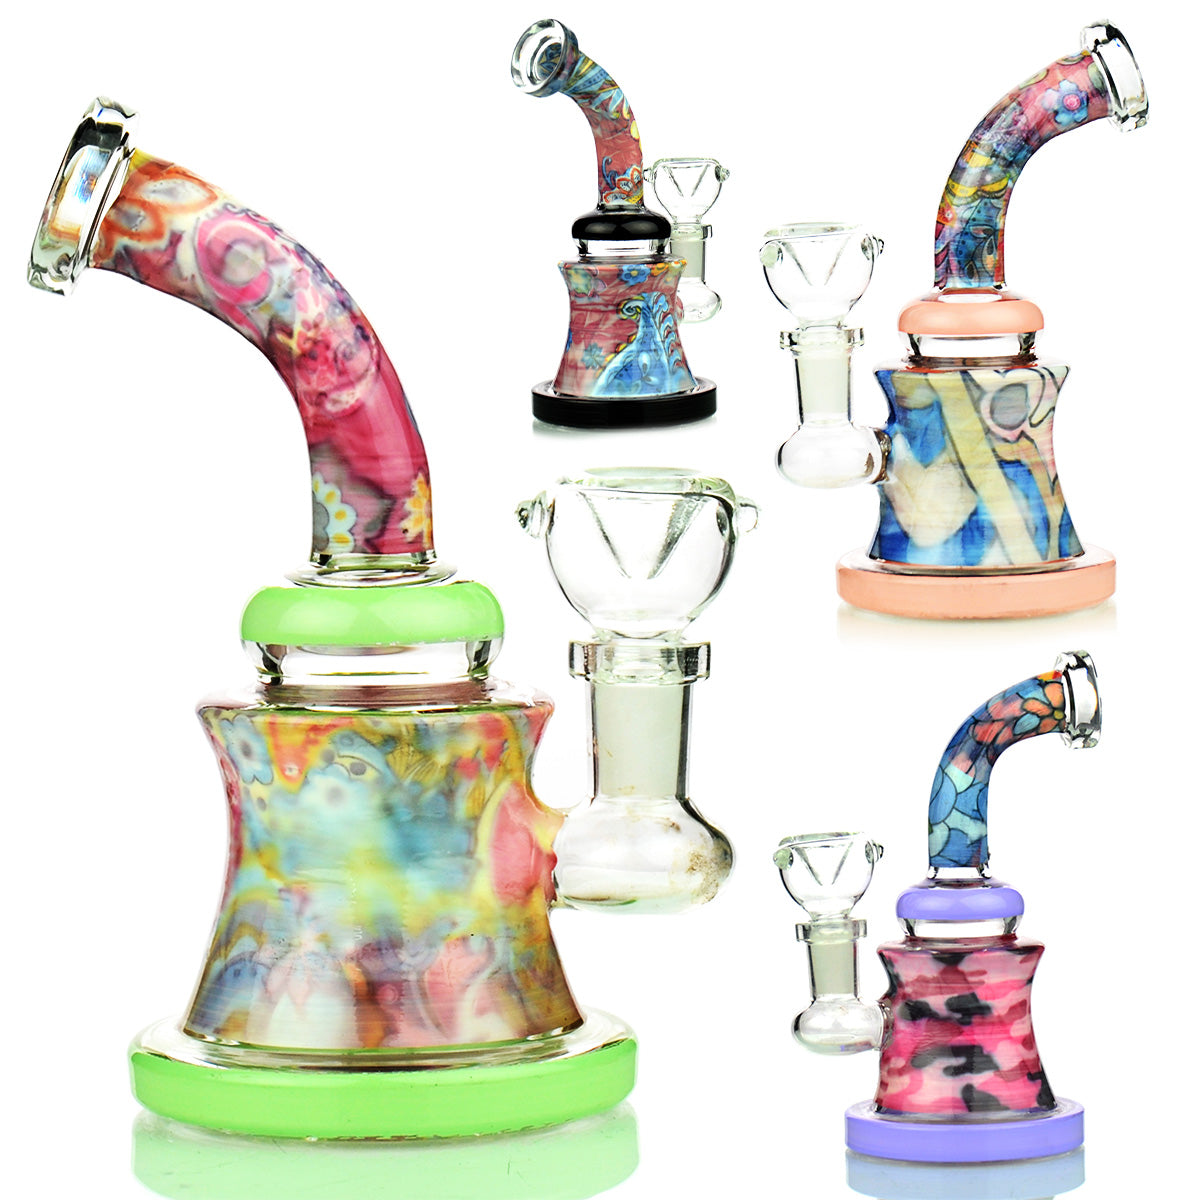 6'' Water PIPE Slime Color Abstract Art with 14mm Male Bowl